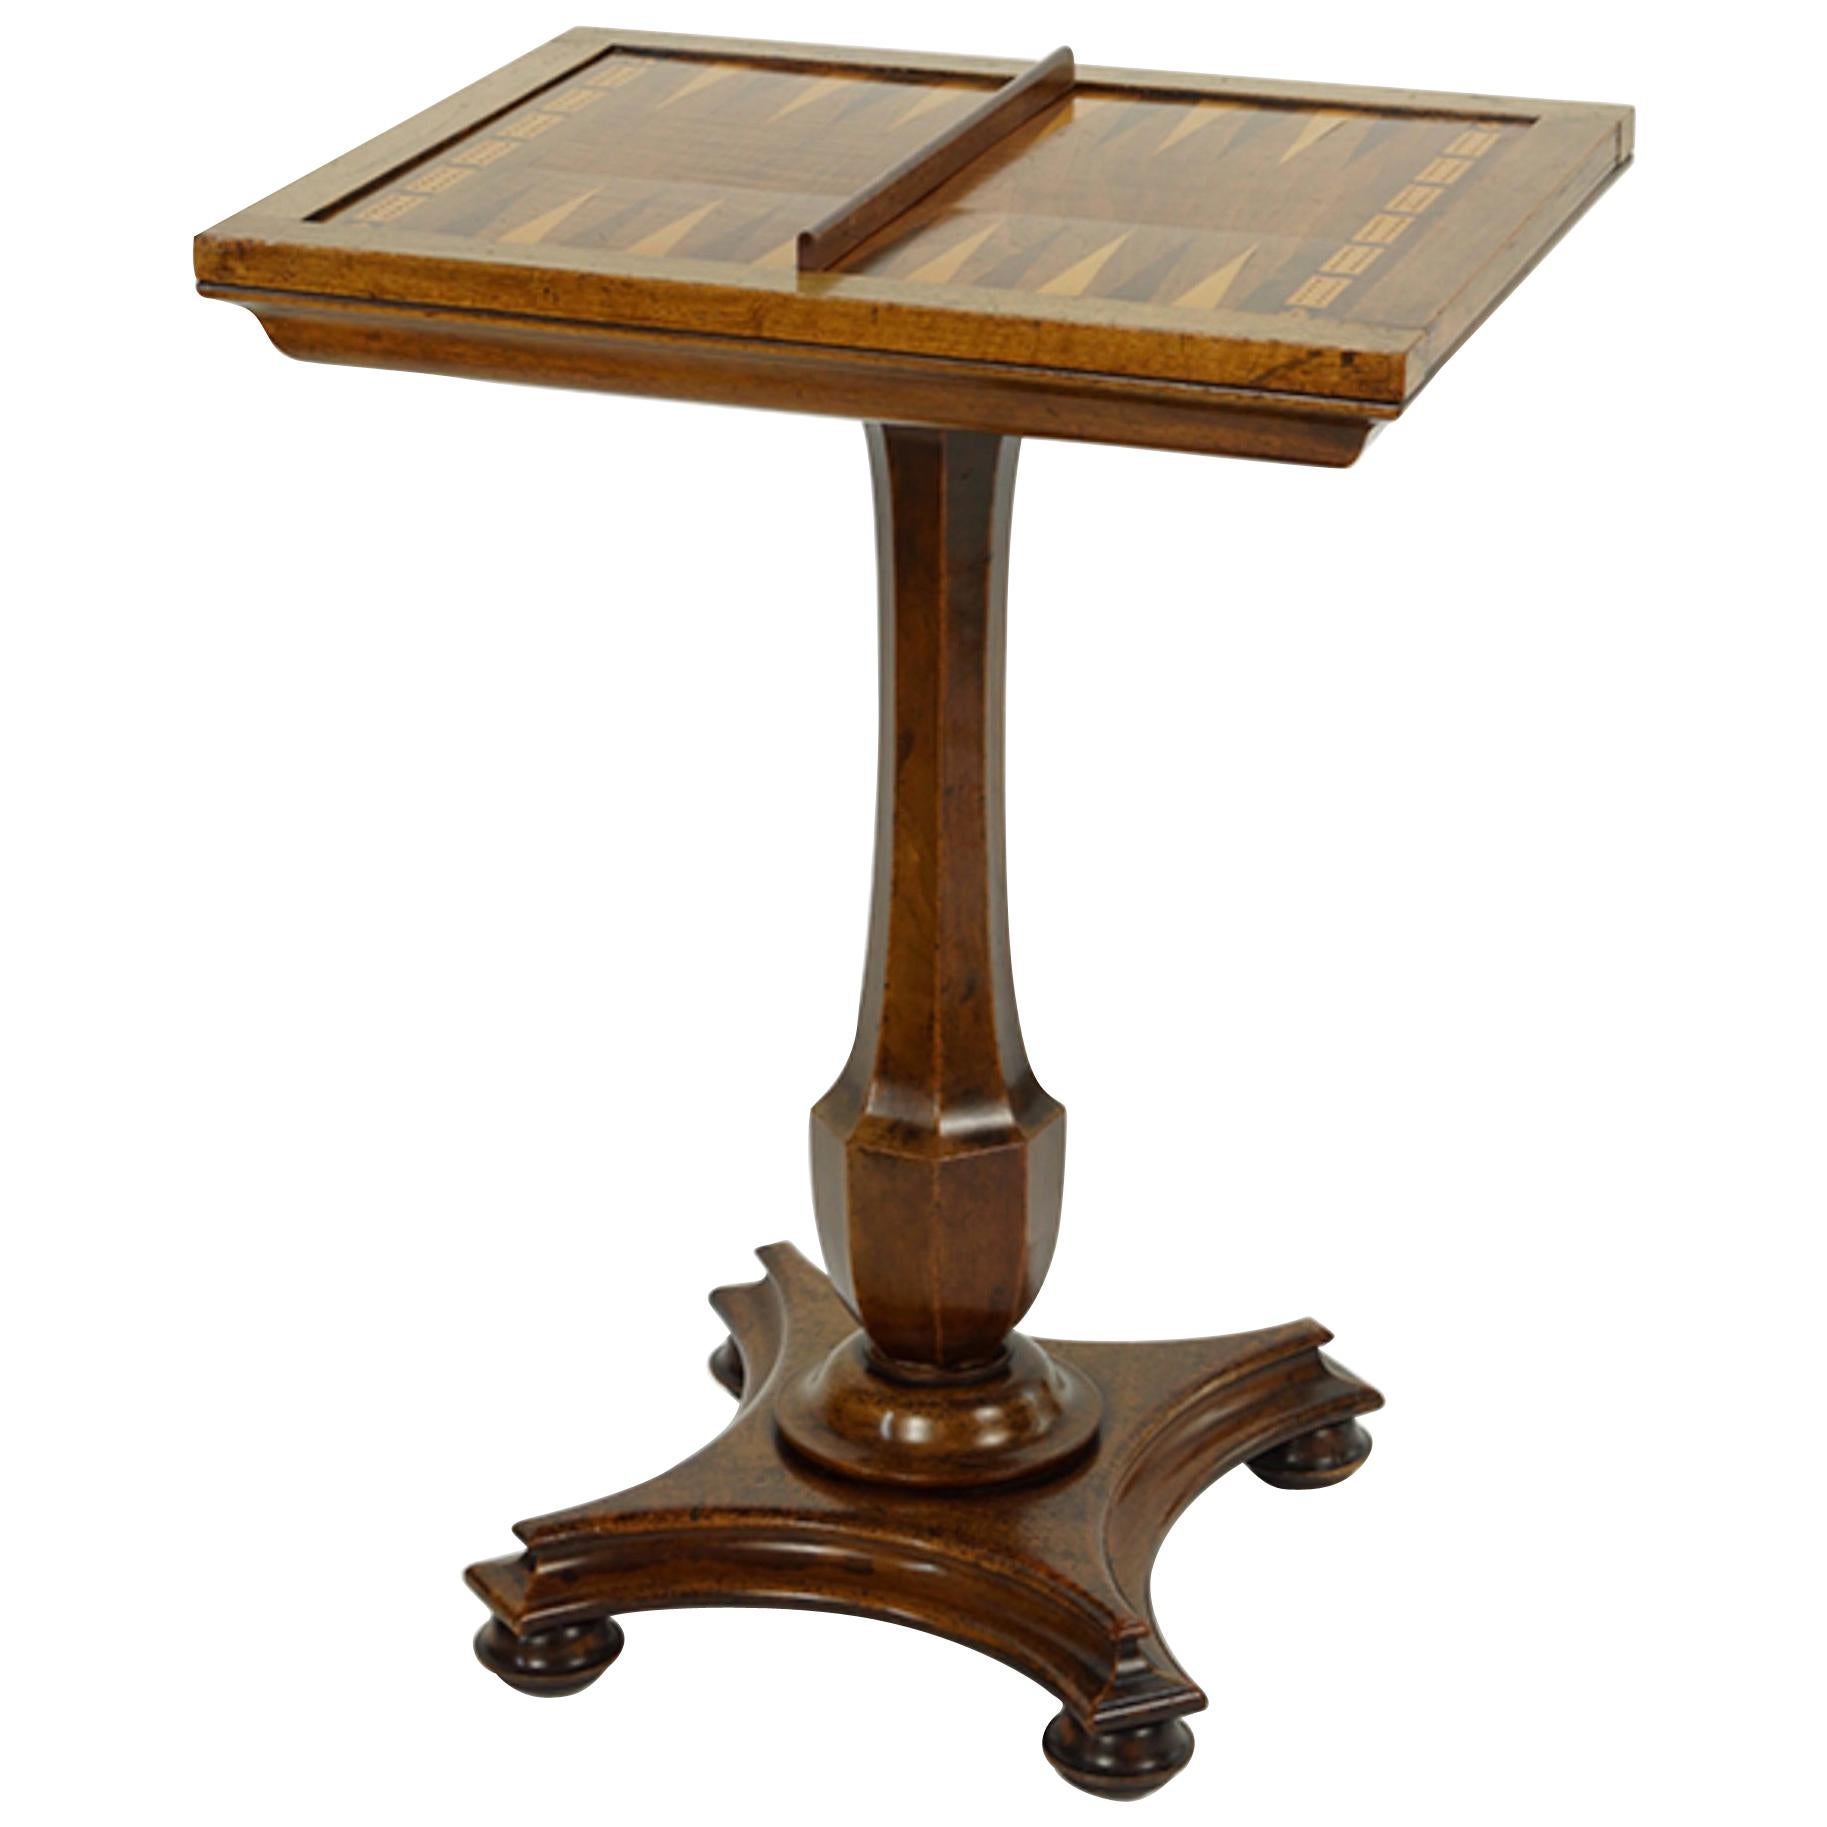 19th English Walnut Games Table, Top Flips For Both Chess And Cribbage/bsckgammo